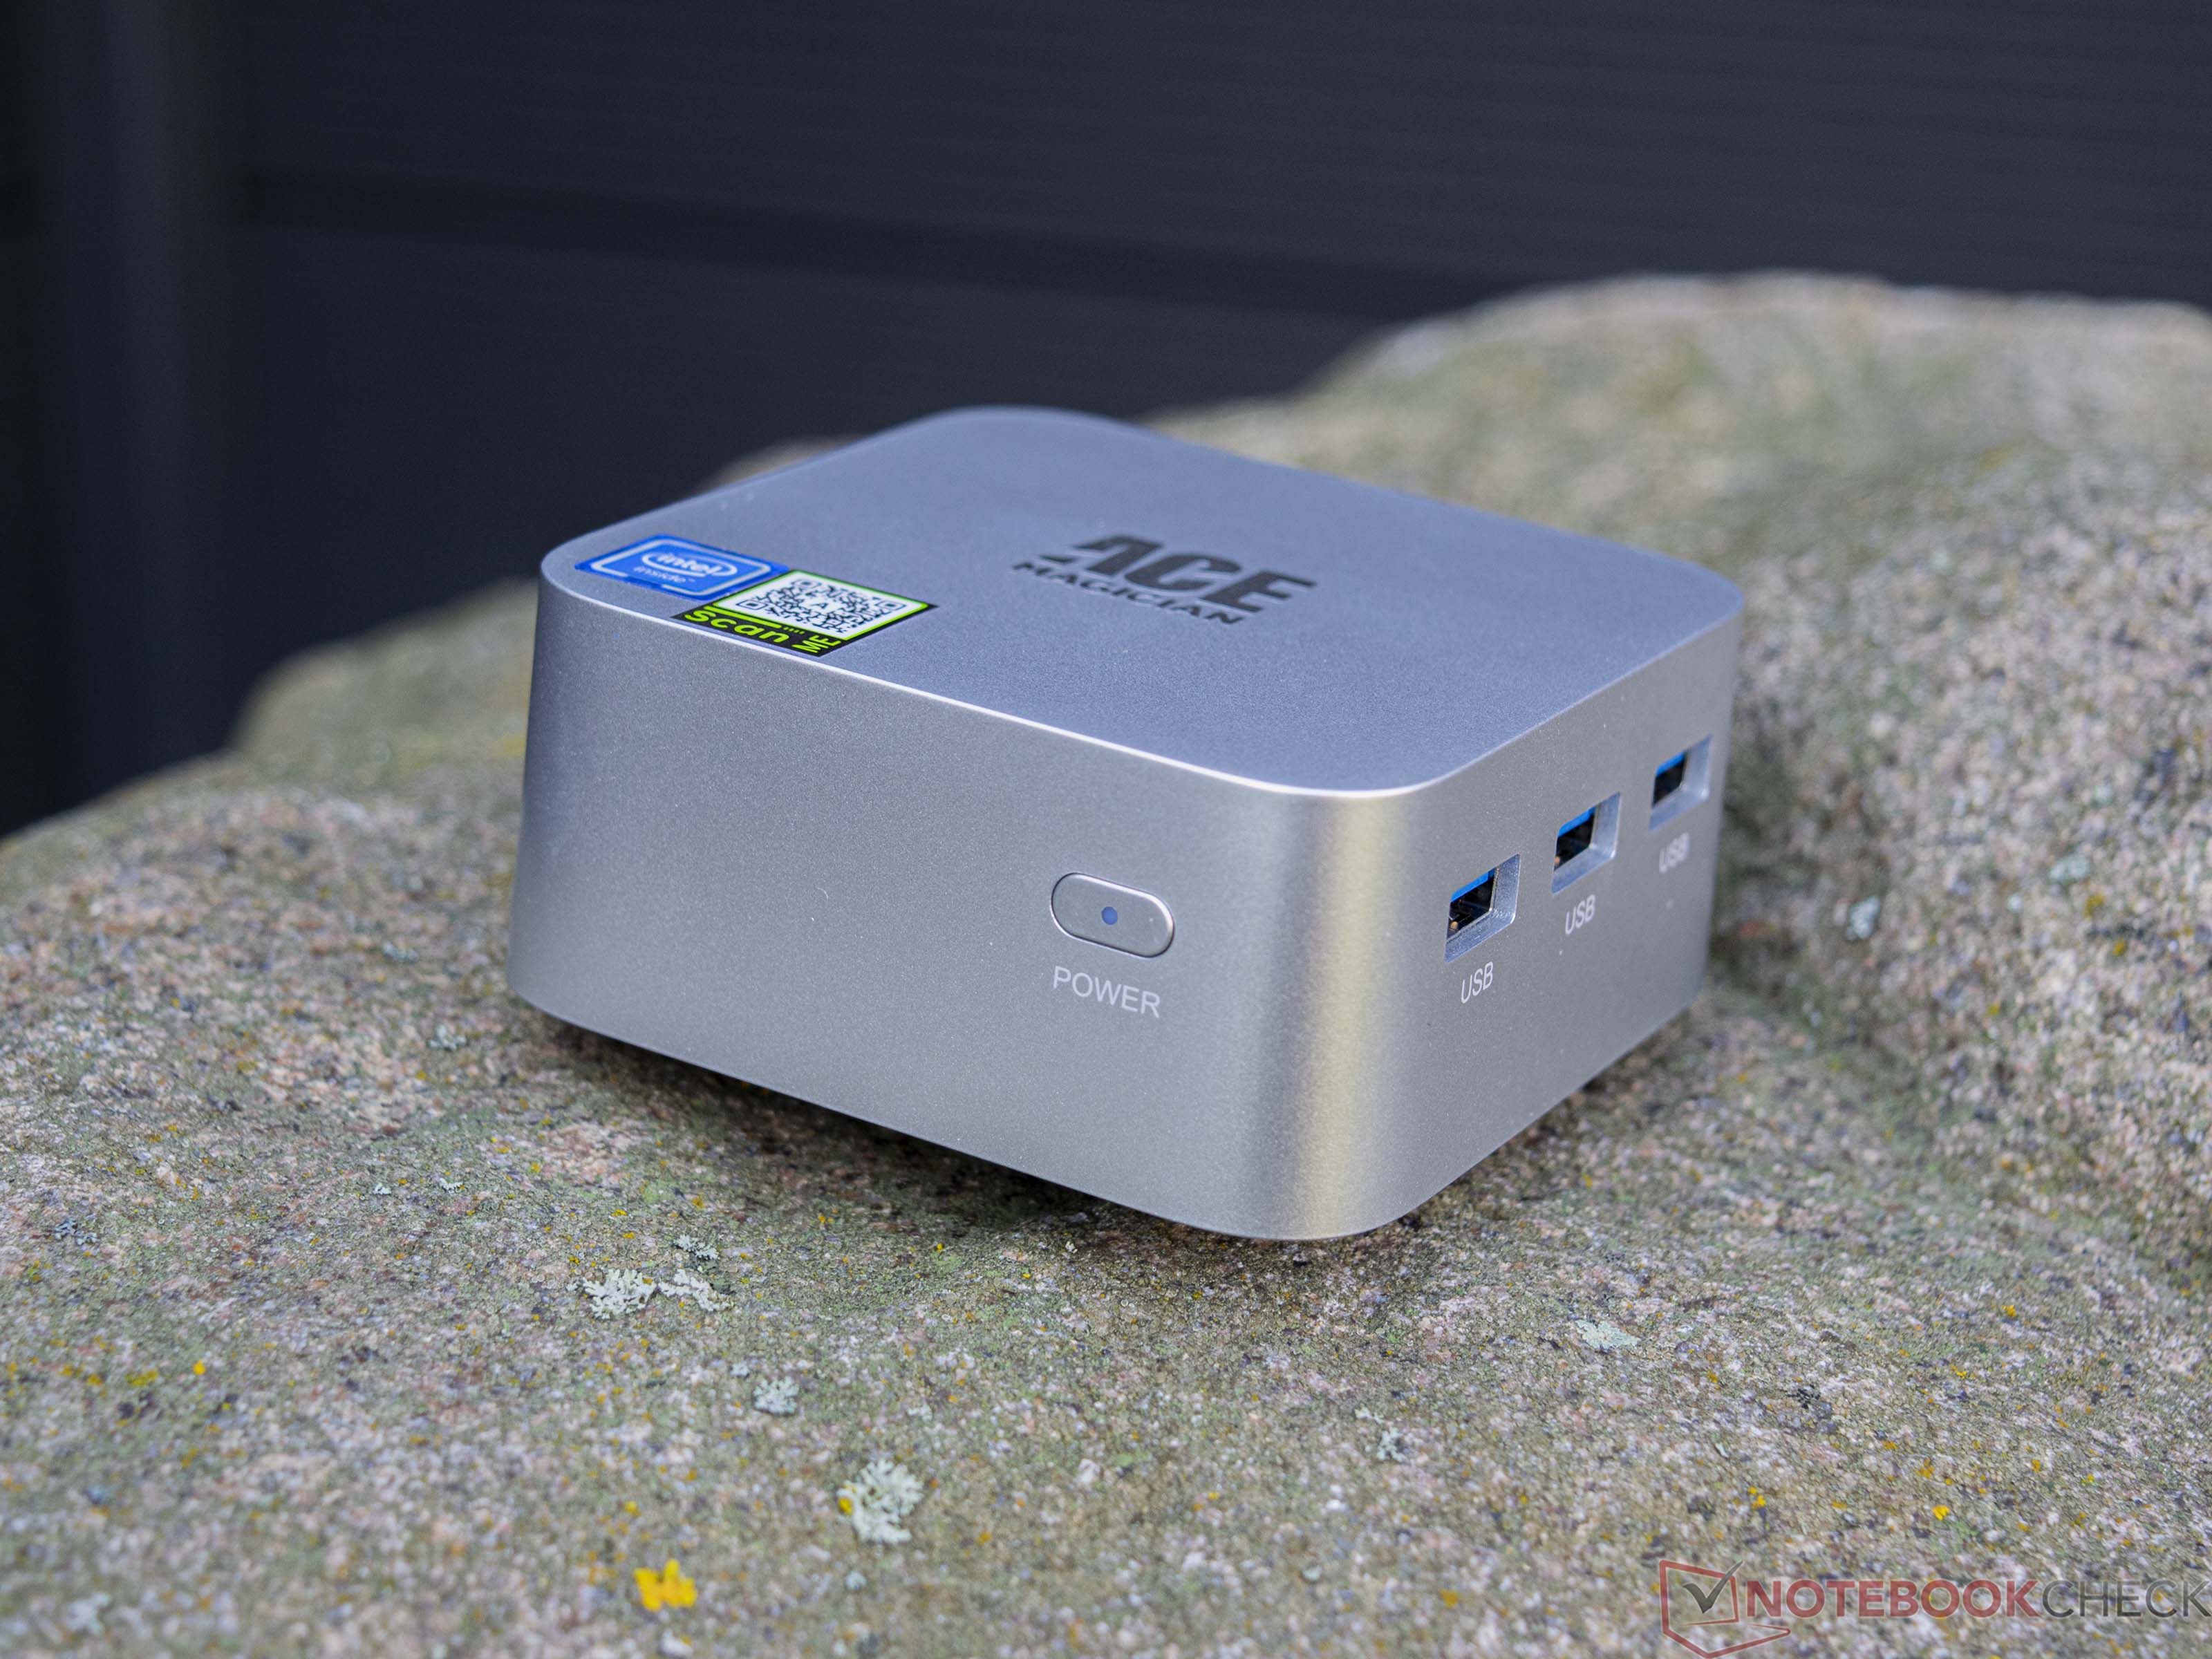 Ace Magician Mini PC, see how simple it is to add additional